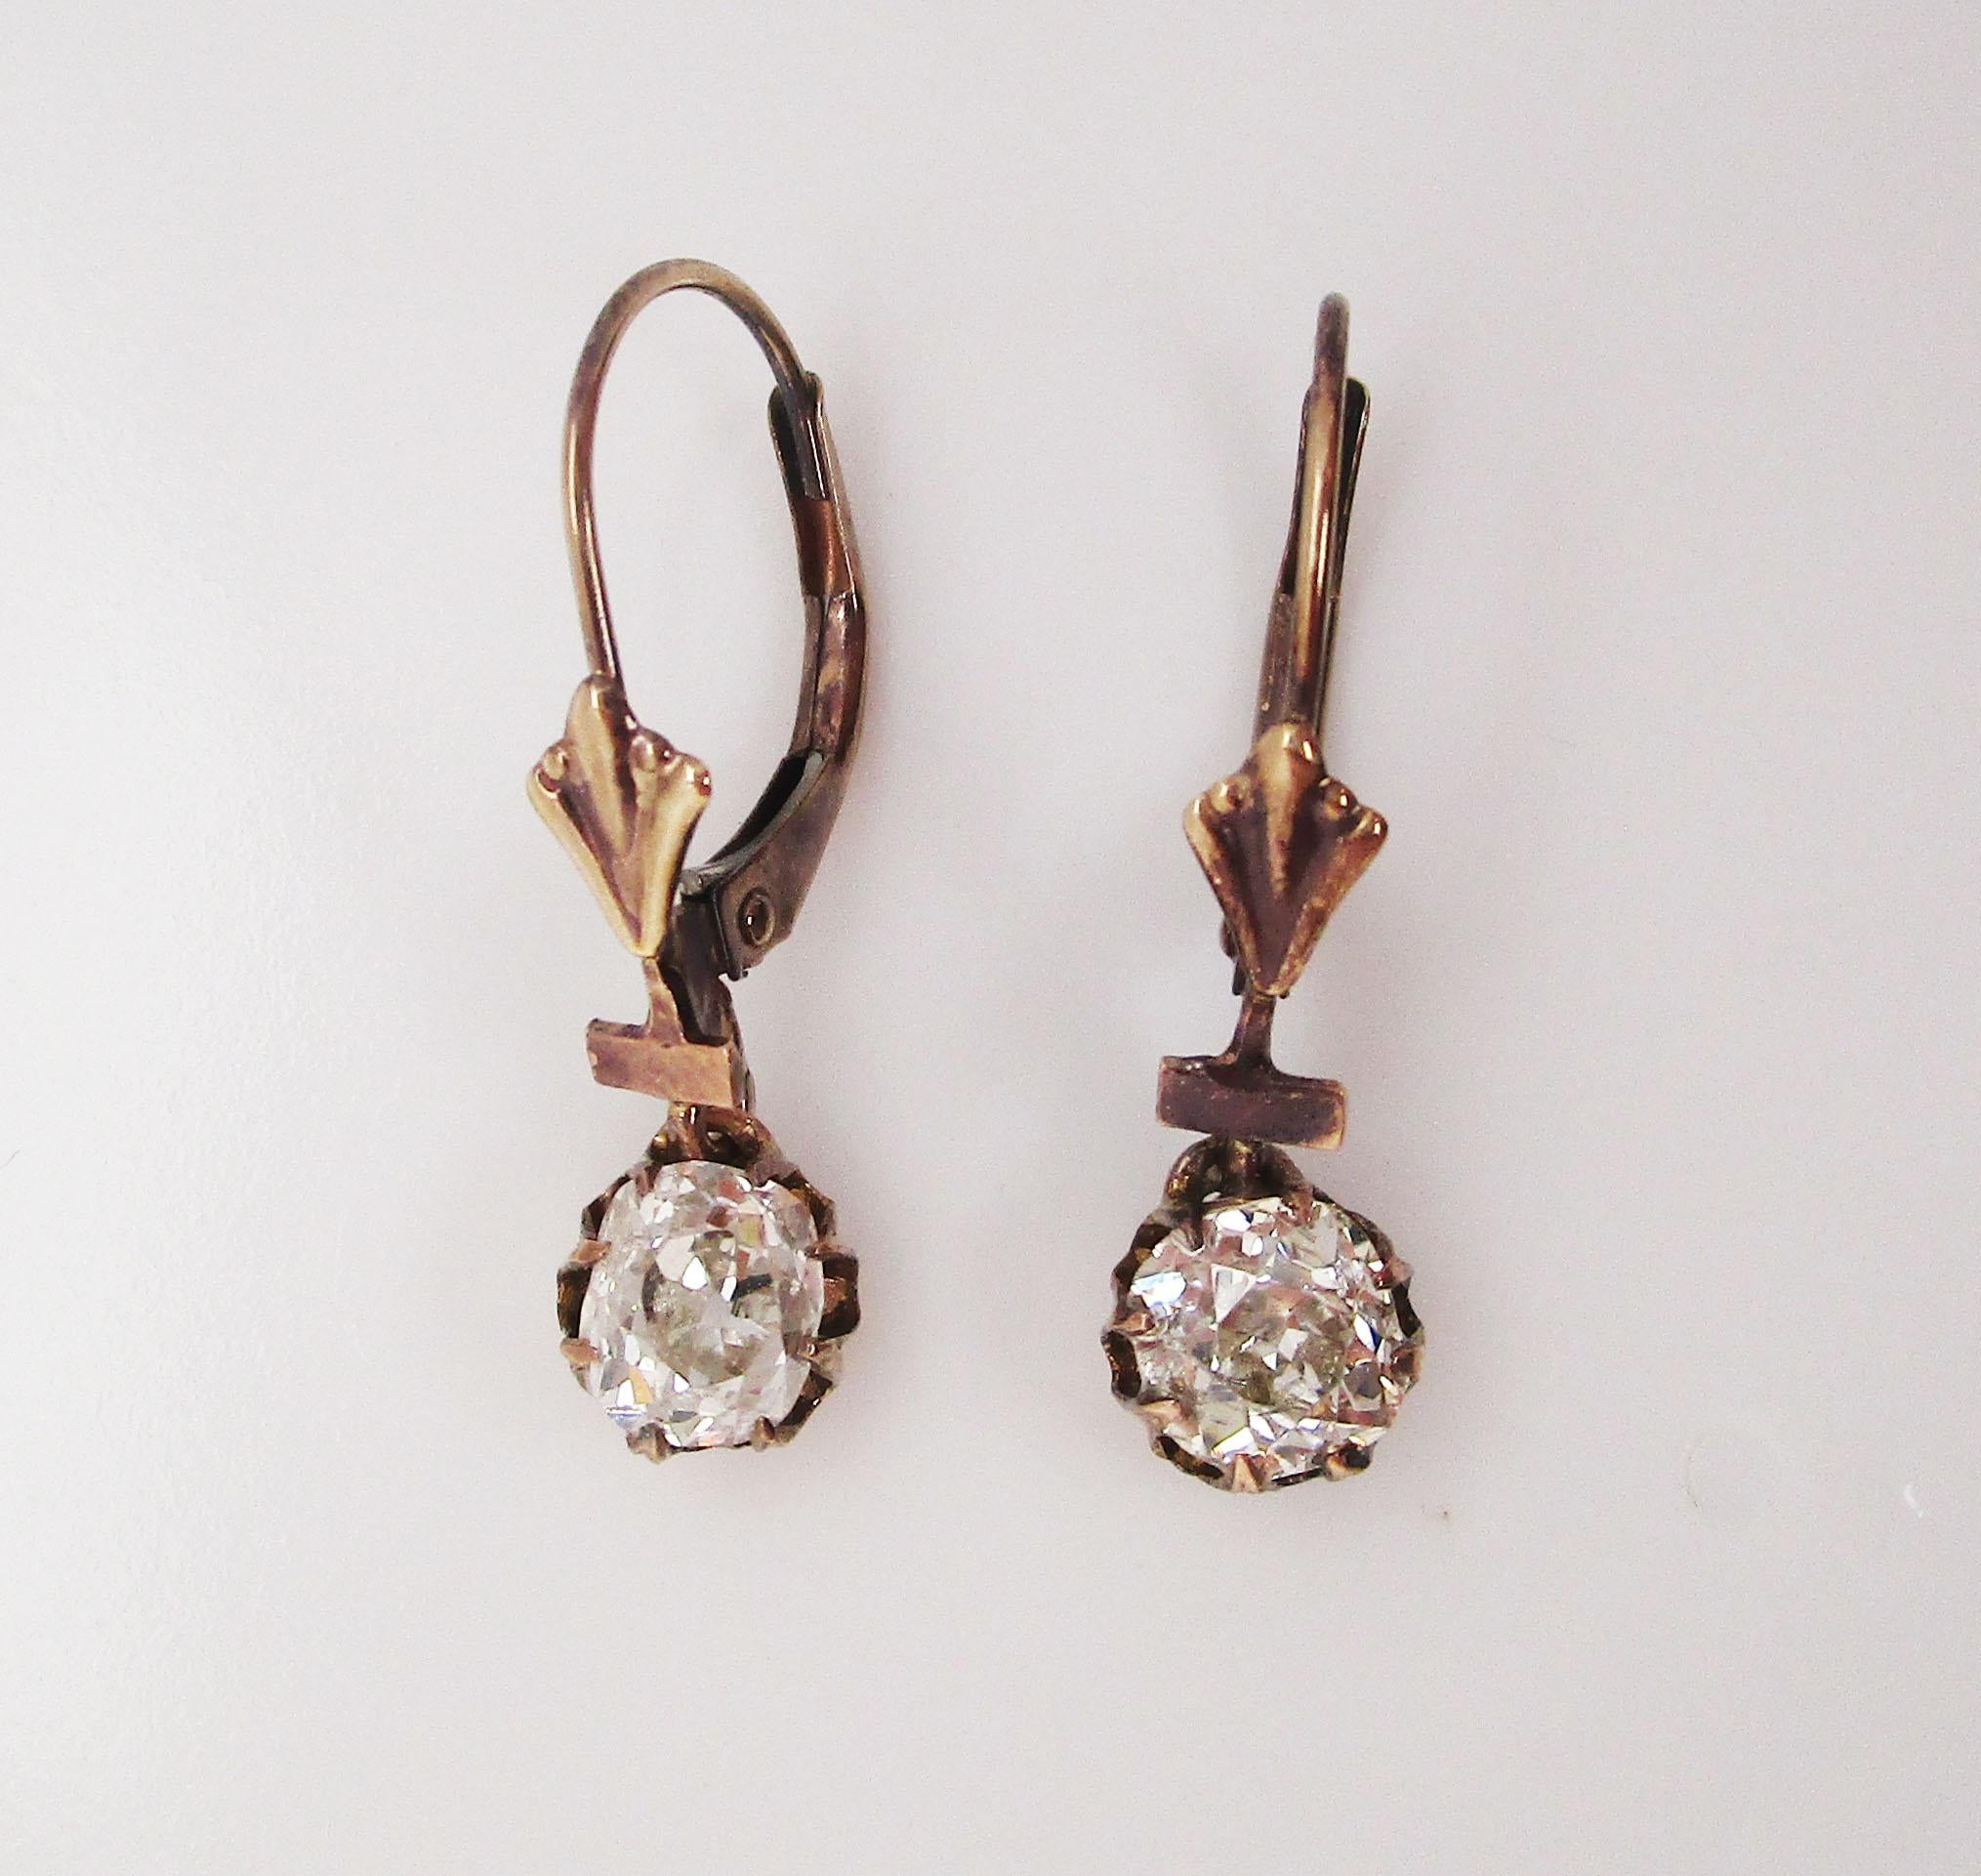 1890 Victorian 14K Rose Gold Old Mine Cut Diamond Dangle Earrings In Good Condition For Sale In Lexington, KY